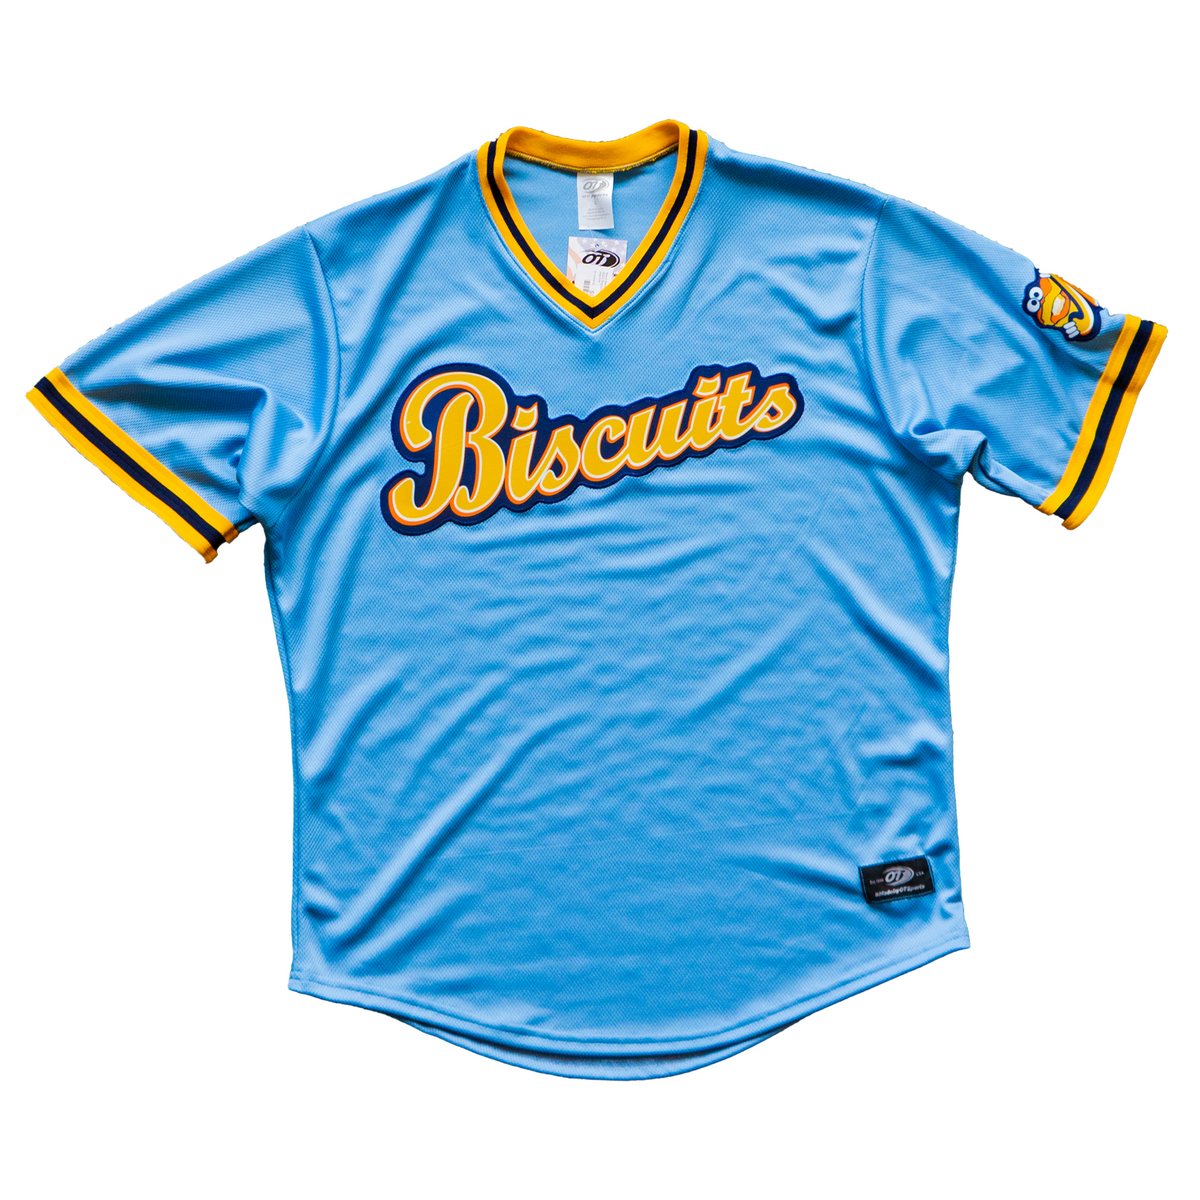 Montgomery Biscuits reveal Back to the Future themed jerseys